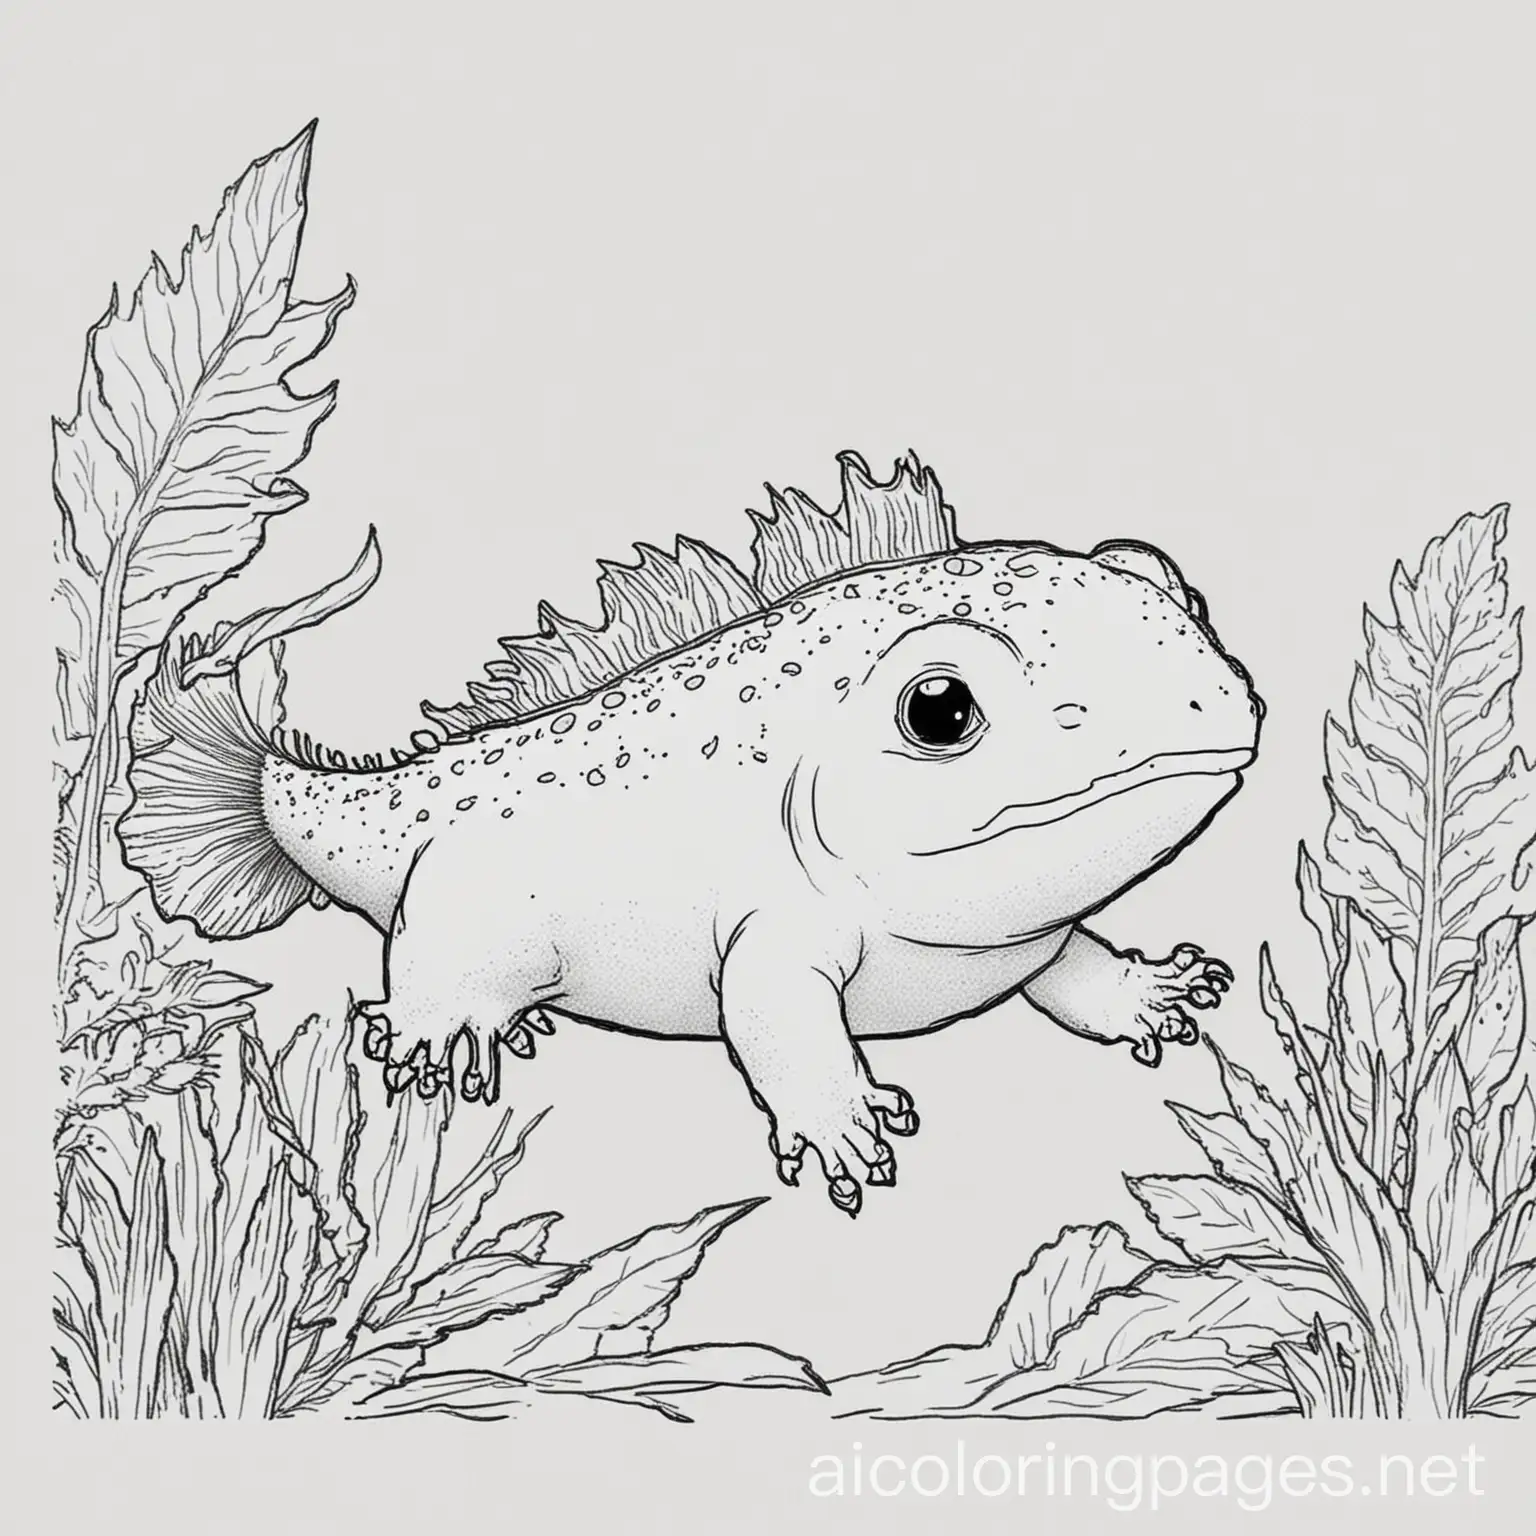 Axolotl-Coloring-Page-Simple-Line-Art-on-White-Background